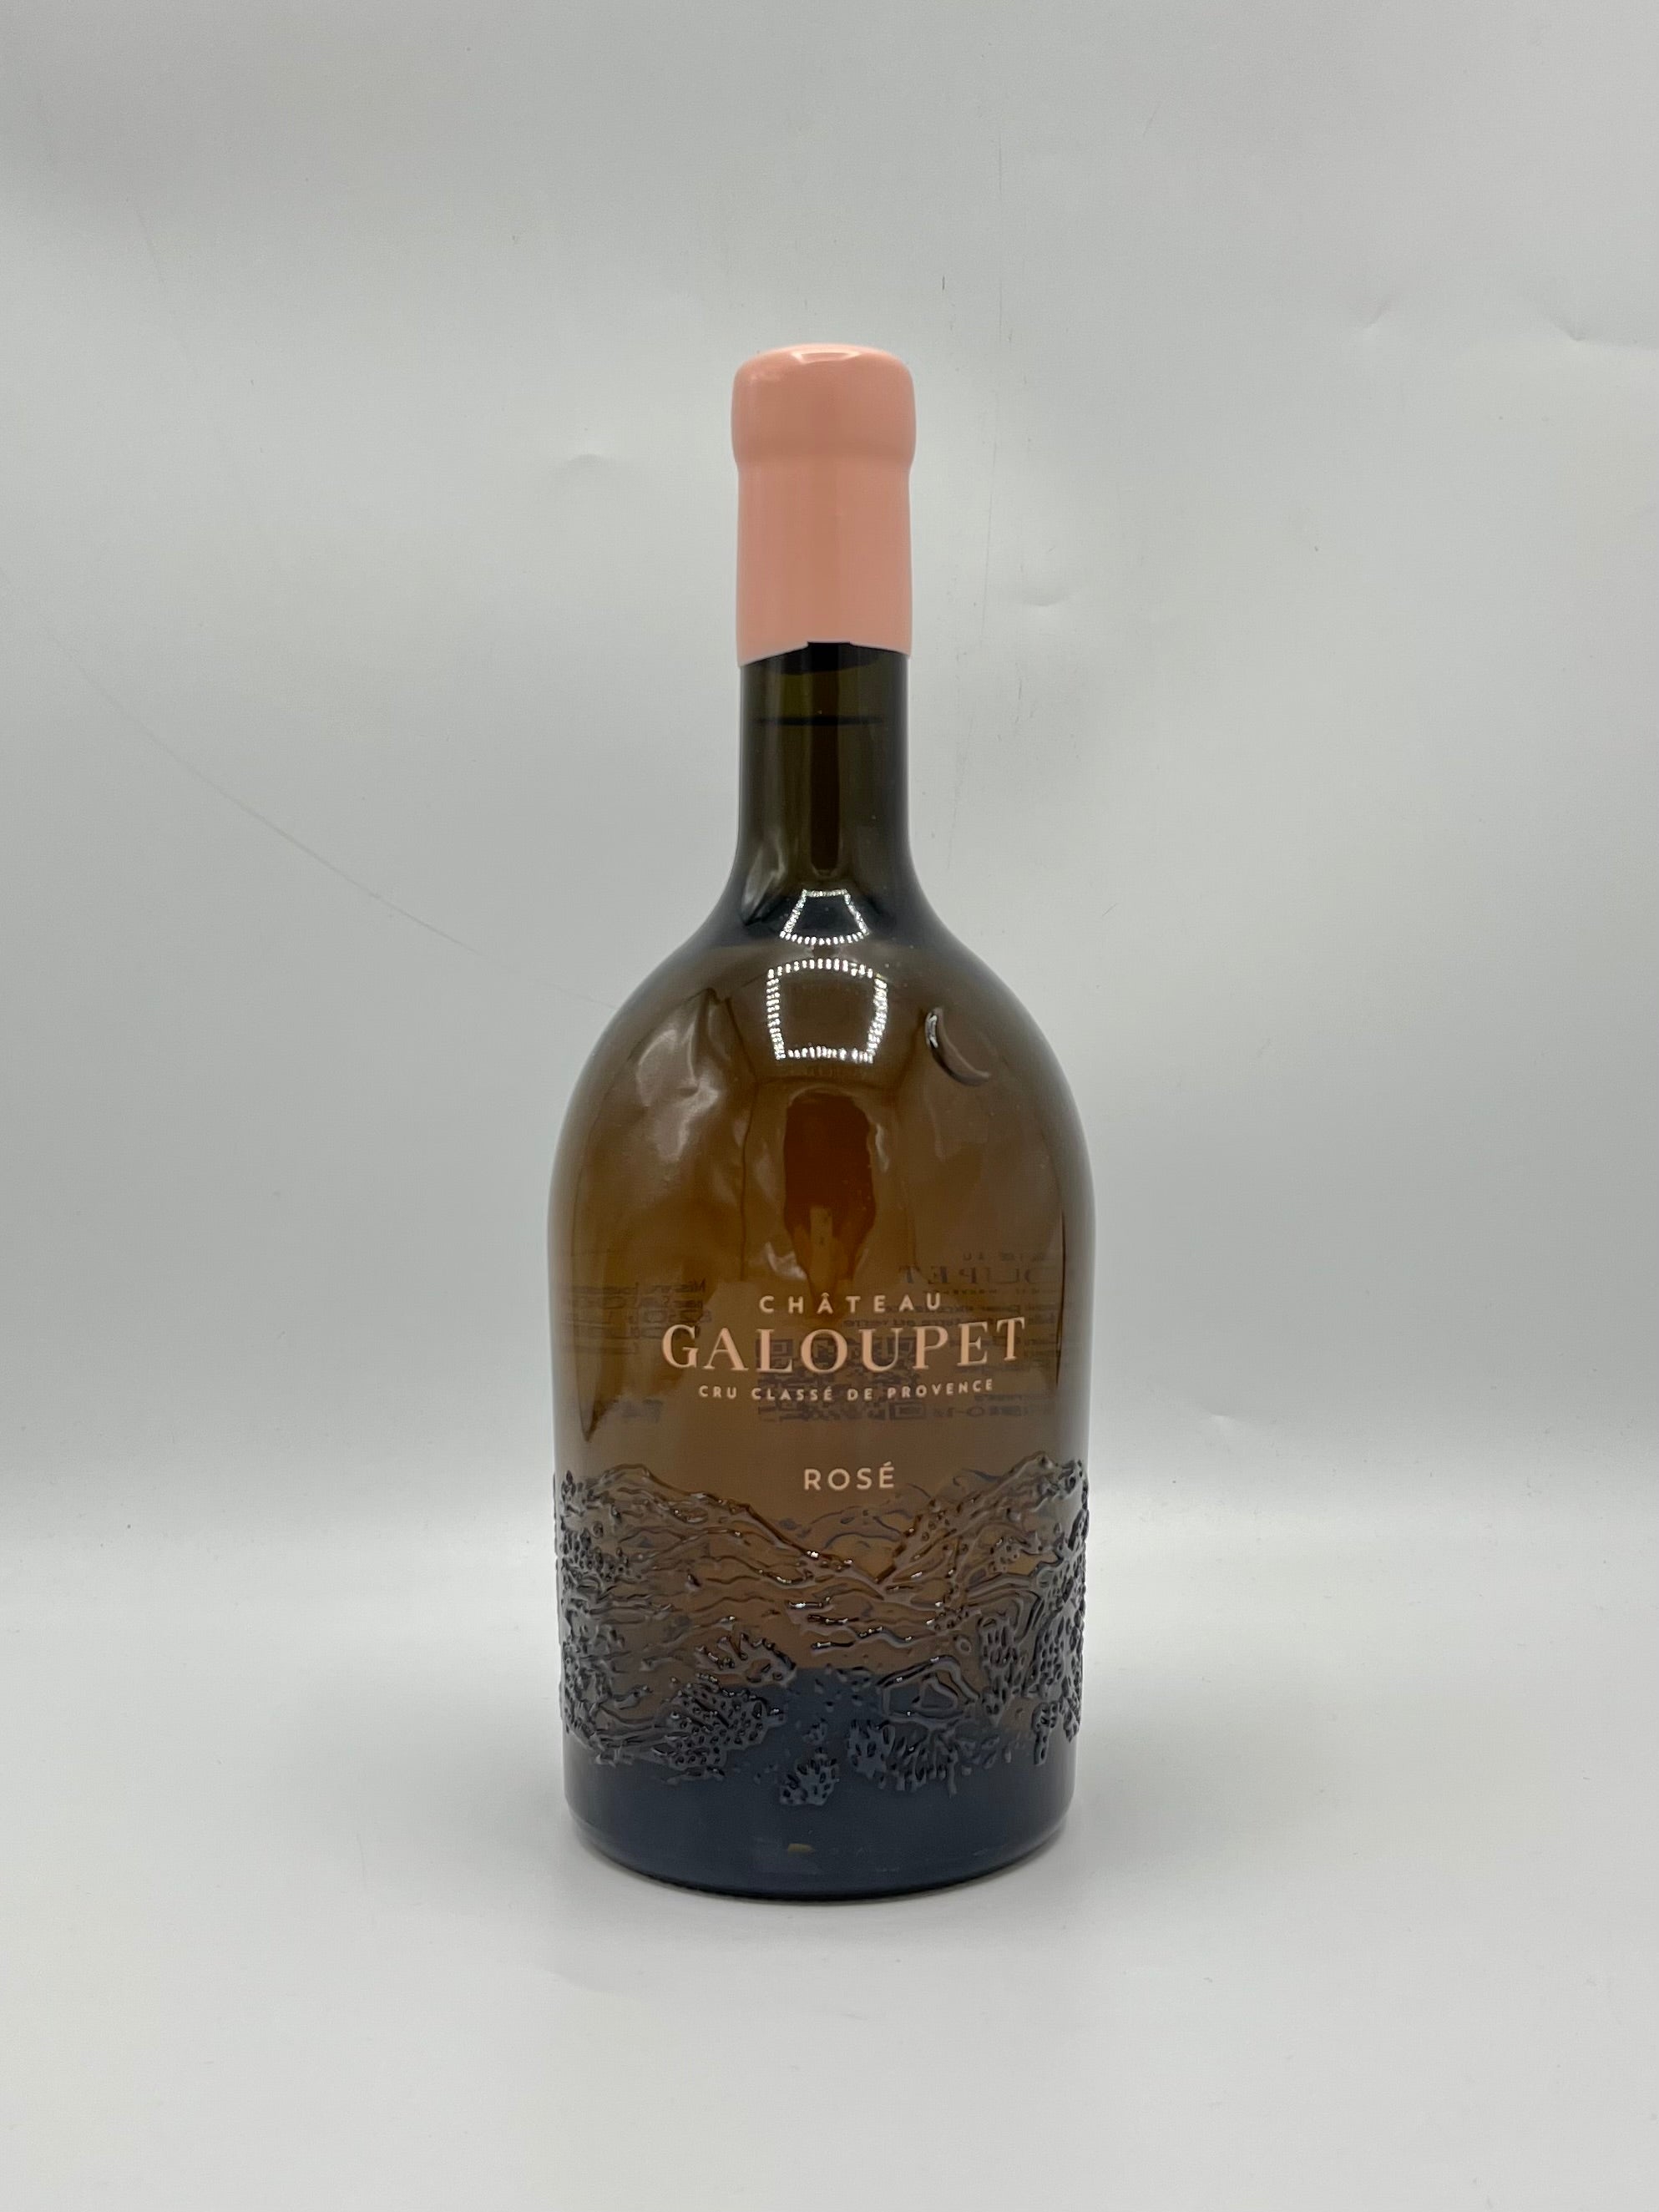 Chateau Galoupet wine from Provence